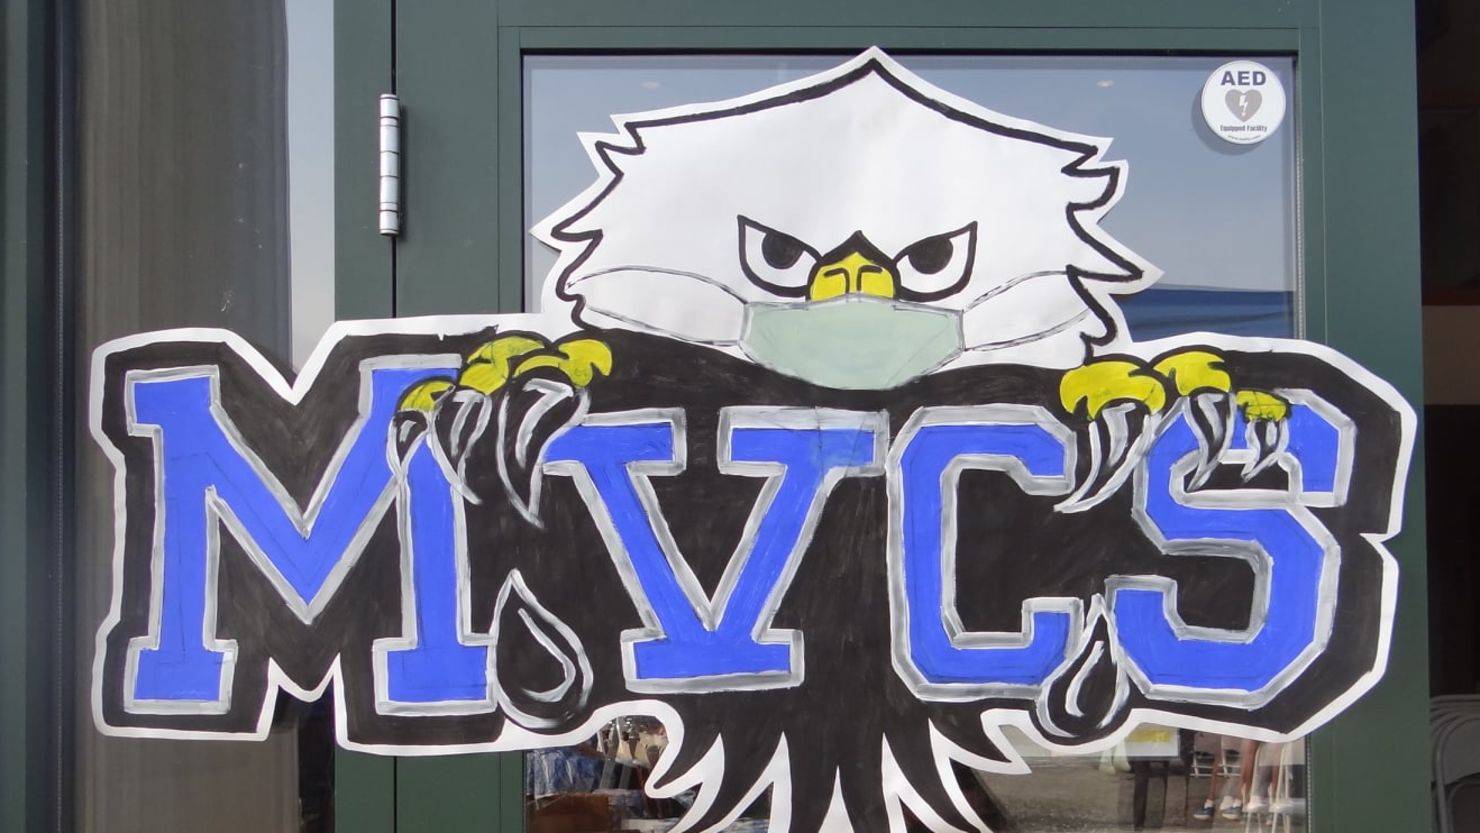 Mid Vermont Christian School (MVCS) was set to play Long Trail School on February 21, but forfeited the game according to the head of school at MVCS, Vicky Fogg.